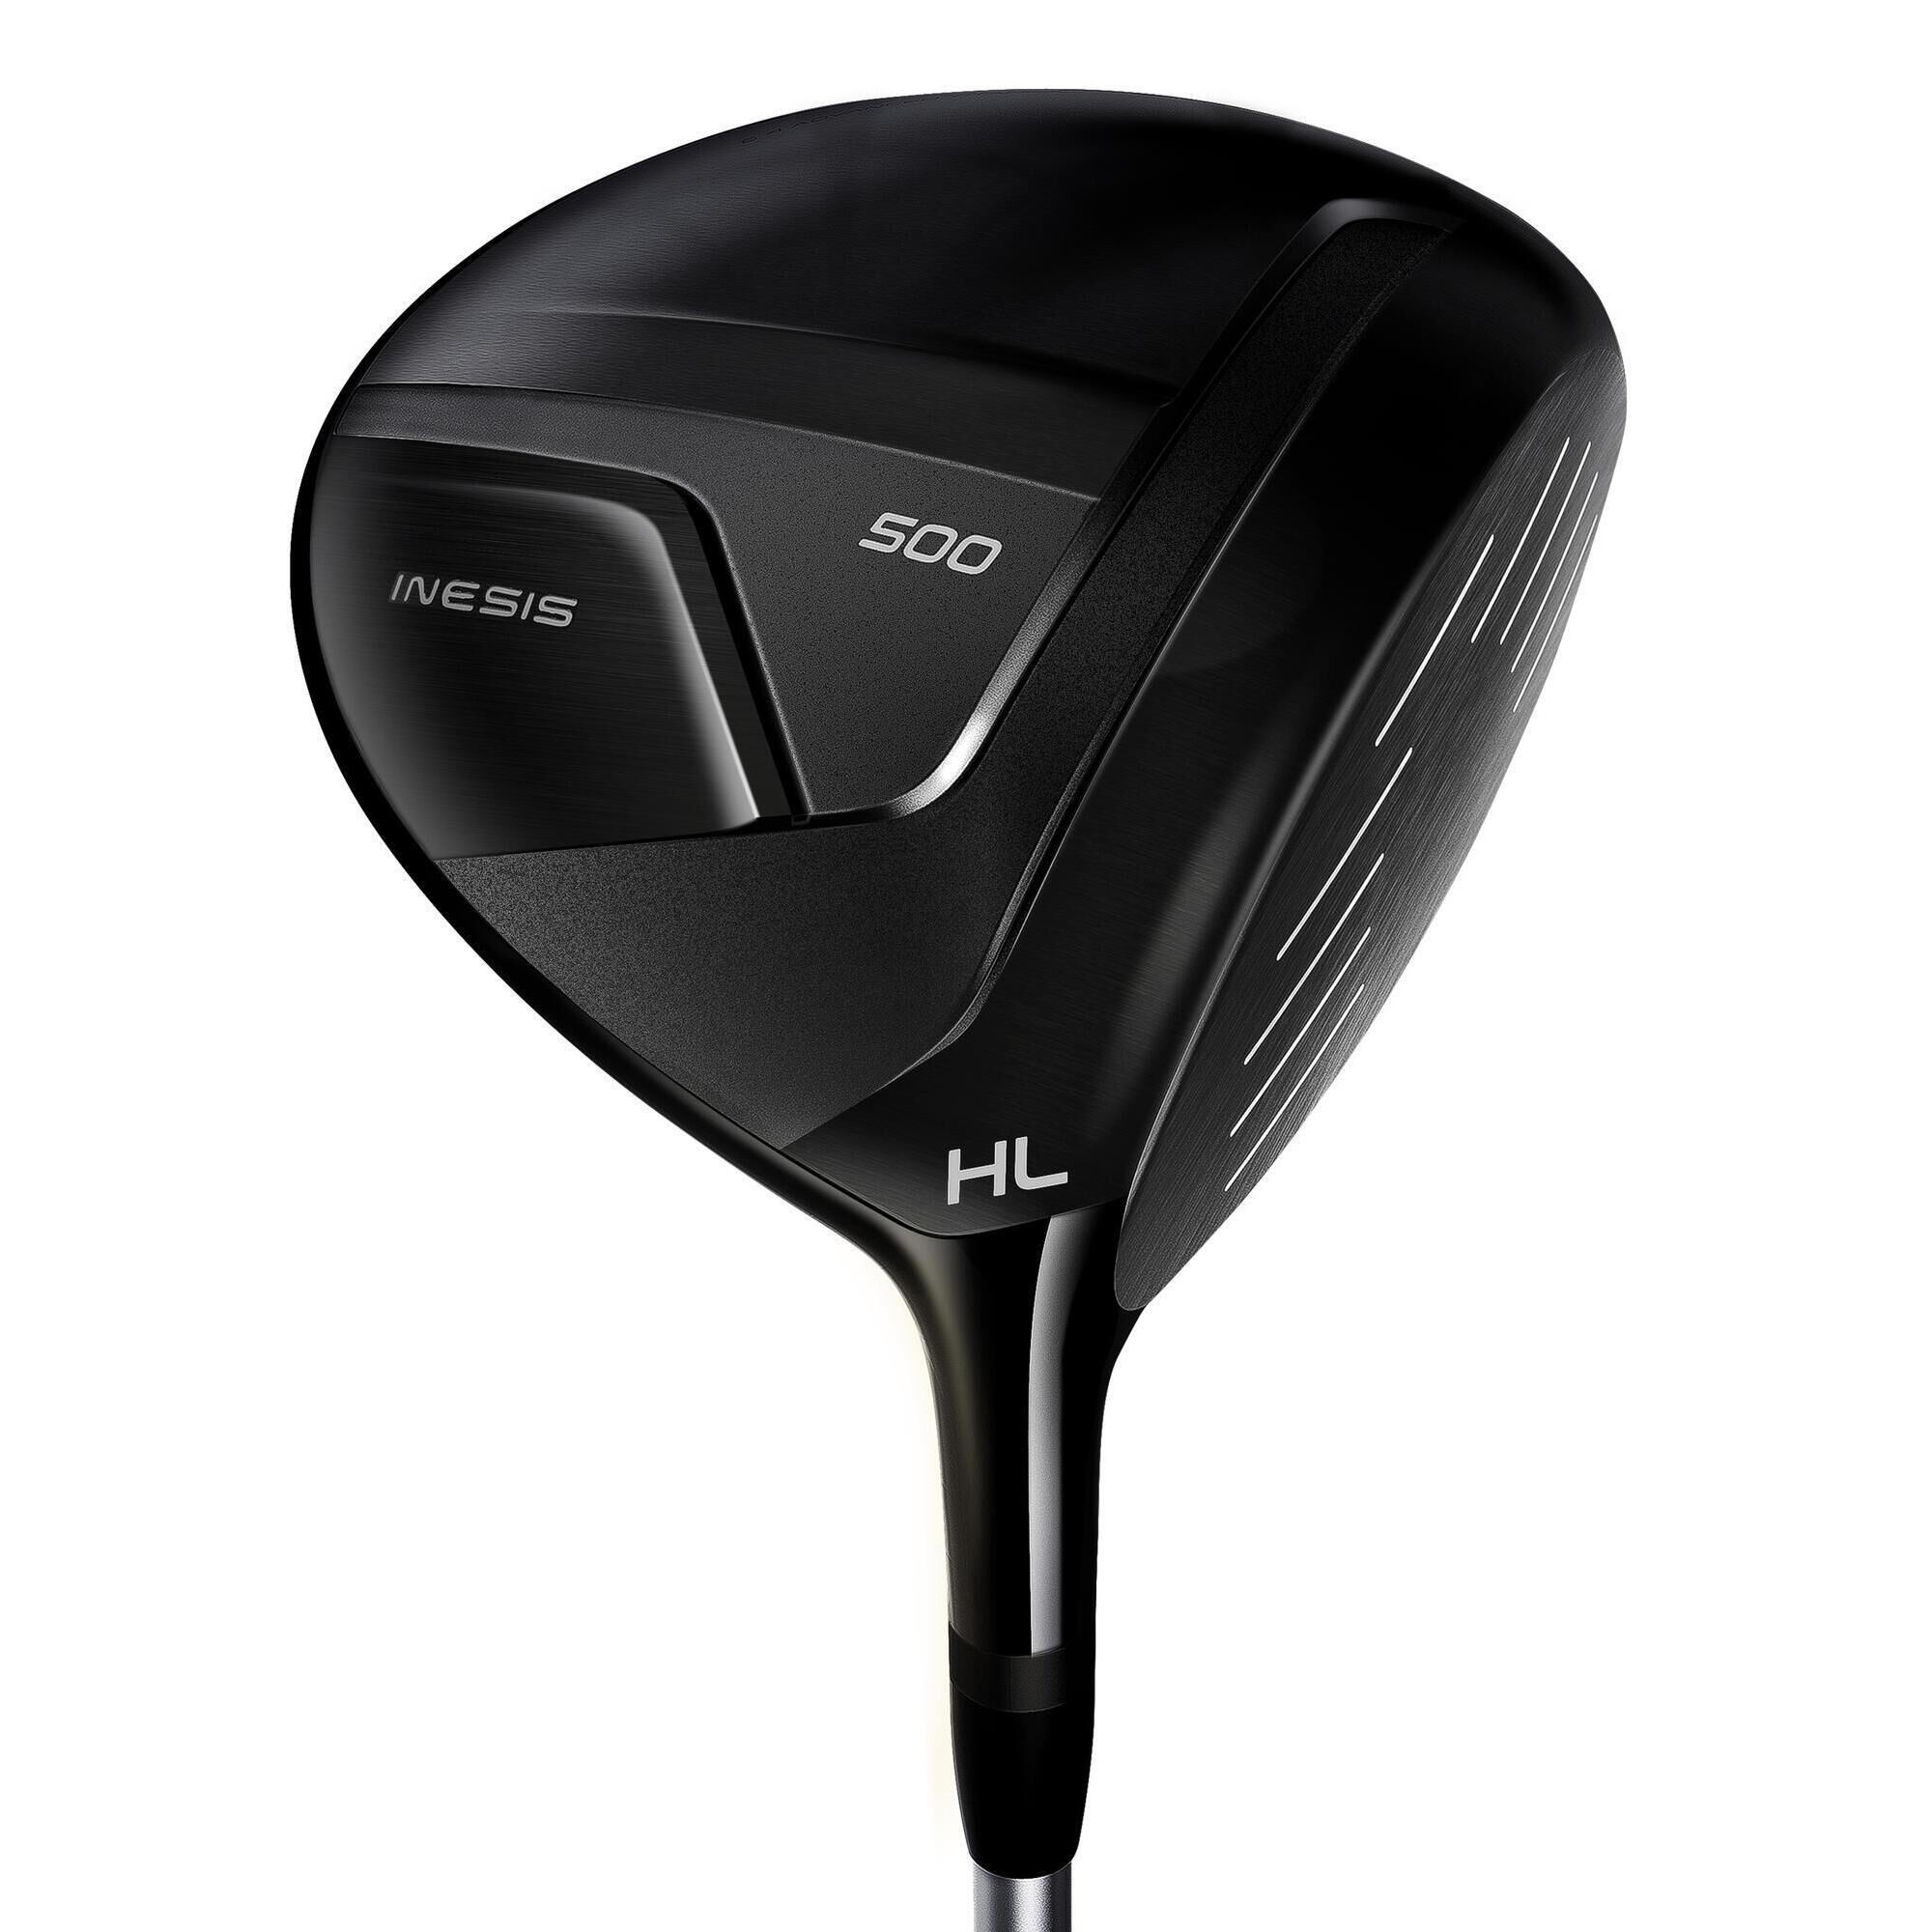 INESIS Golf driver right-handed size 2 high speed - INESIS 500